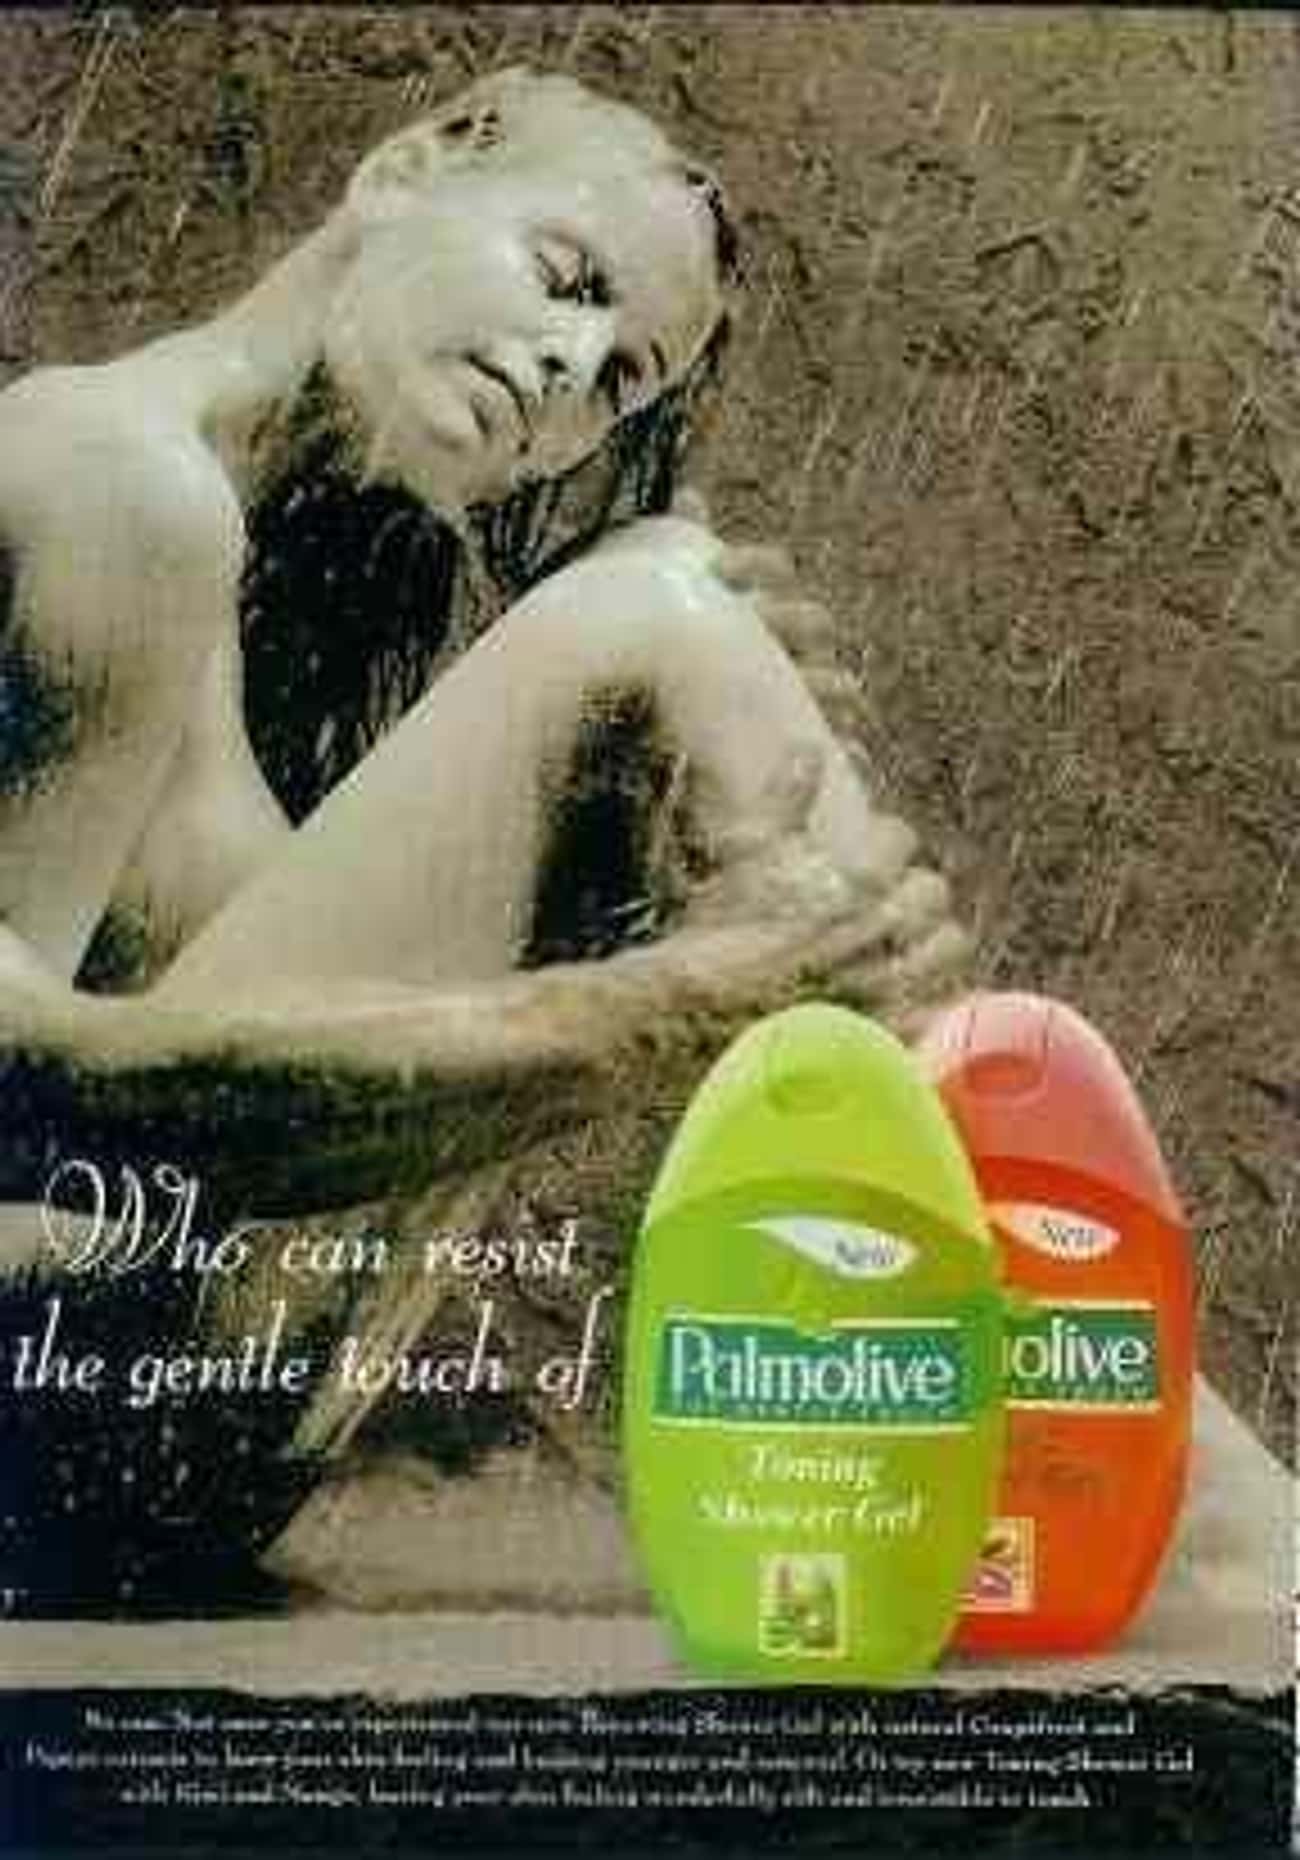 A Palmolive Print Might Ad Gets You All Hot And Nasty For Shower Sex